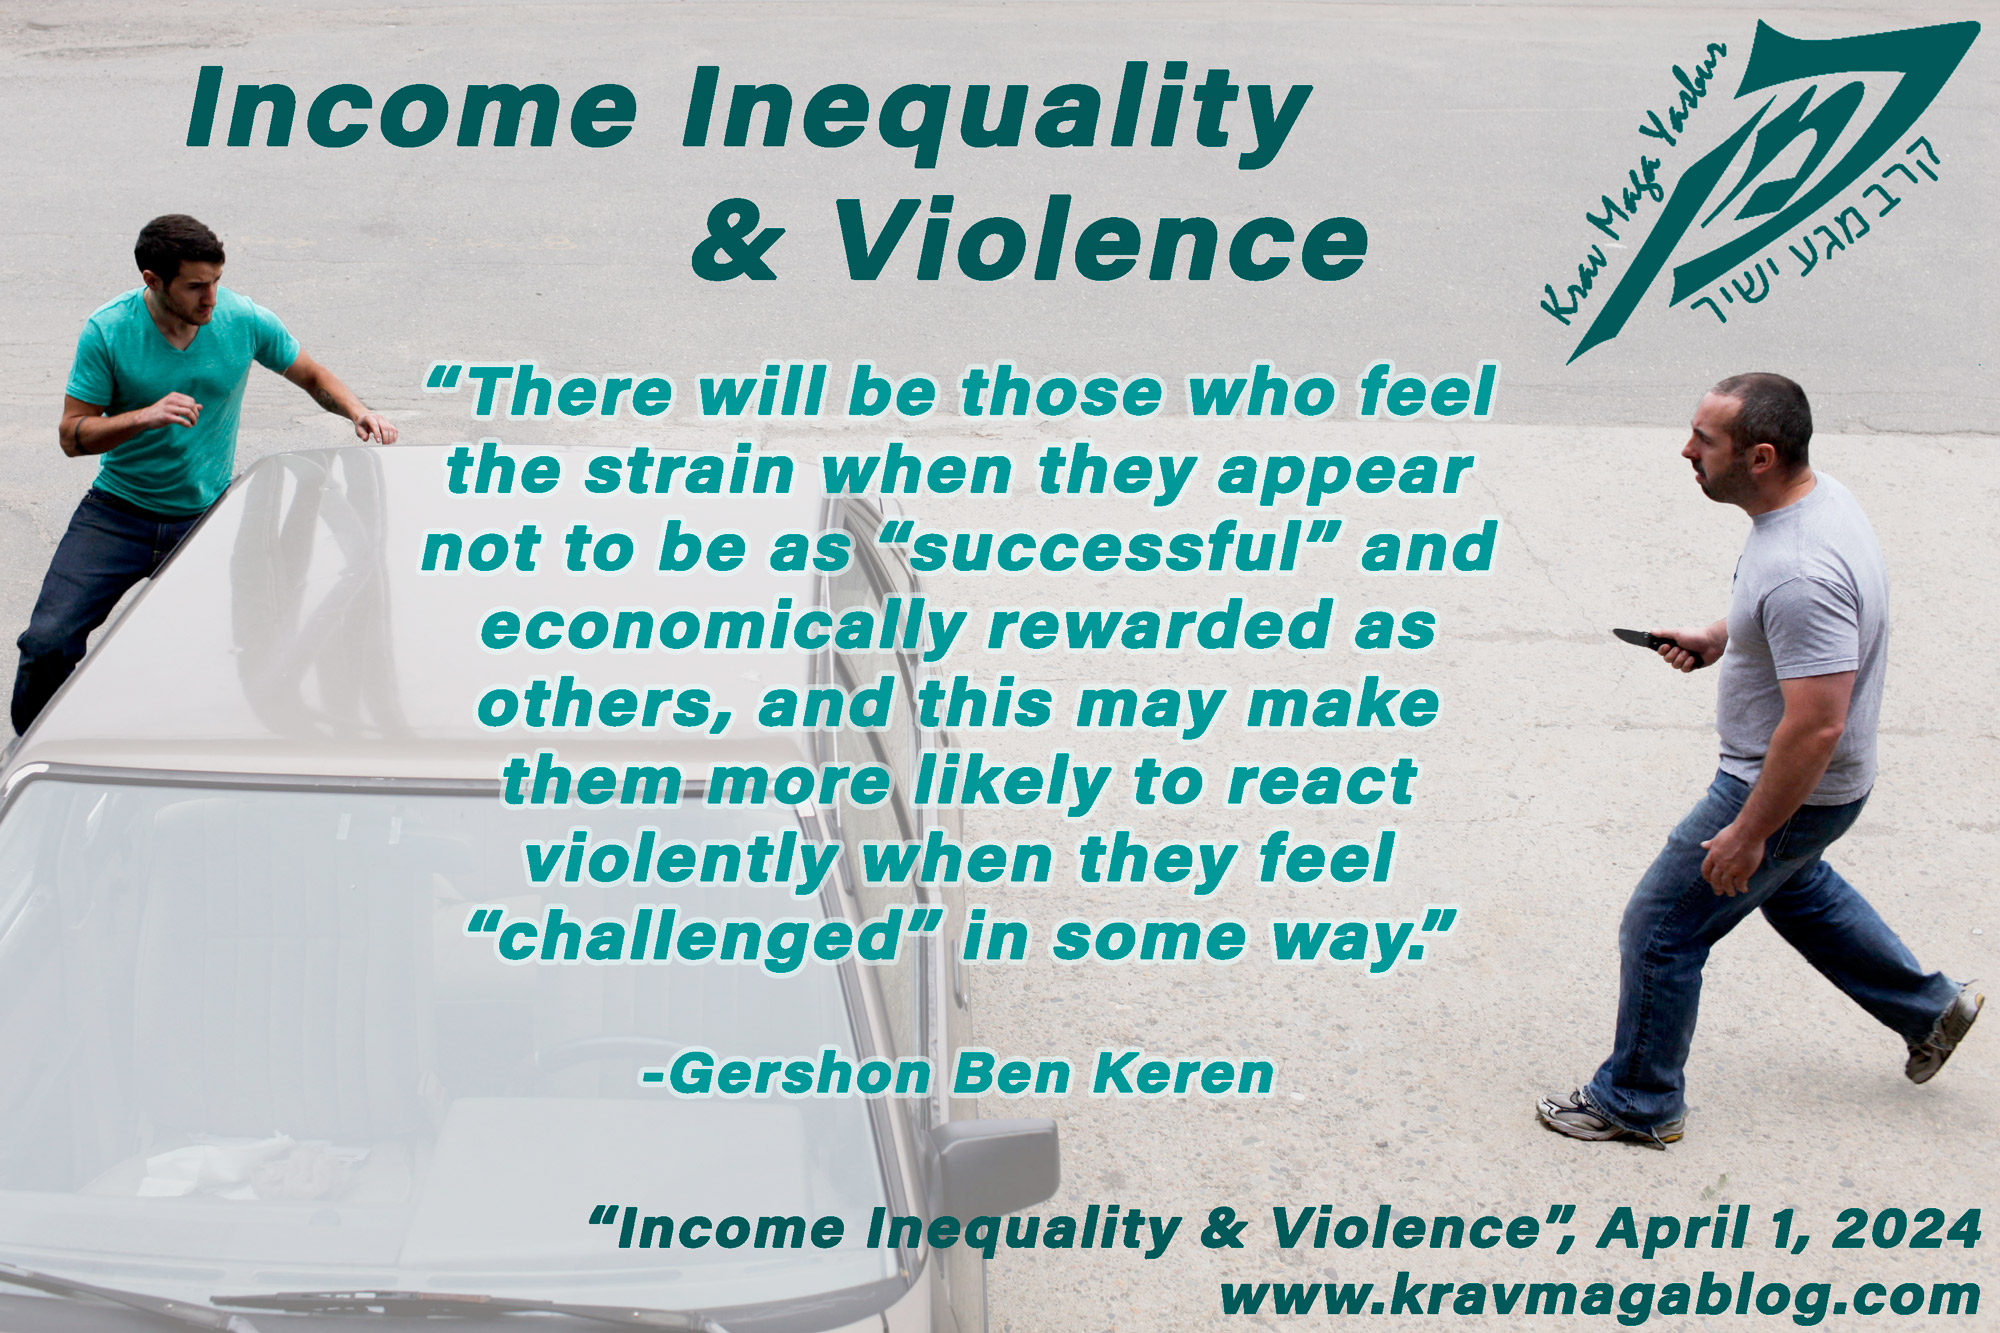 Blog About Income Inequality & Violence